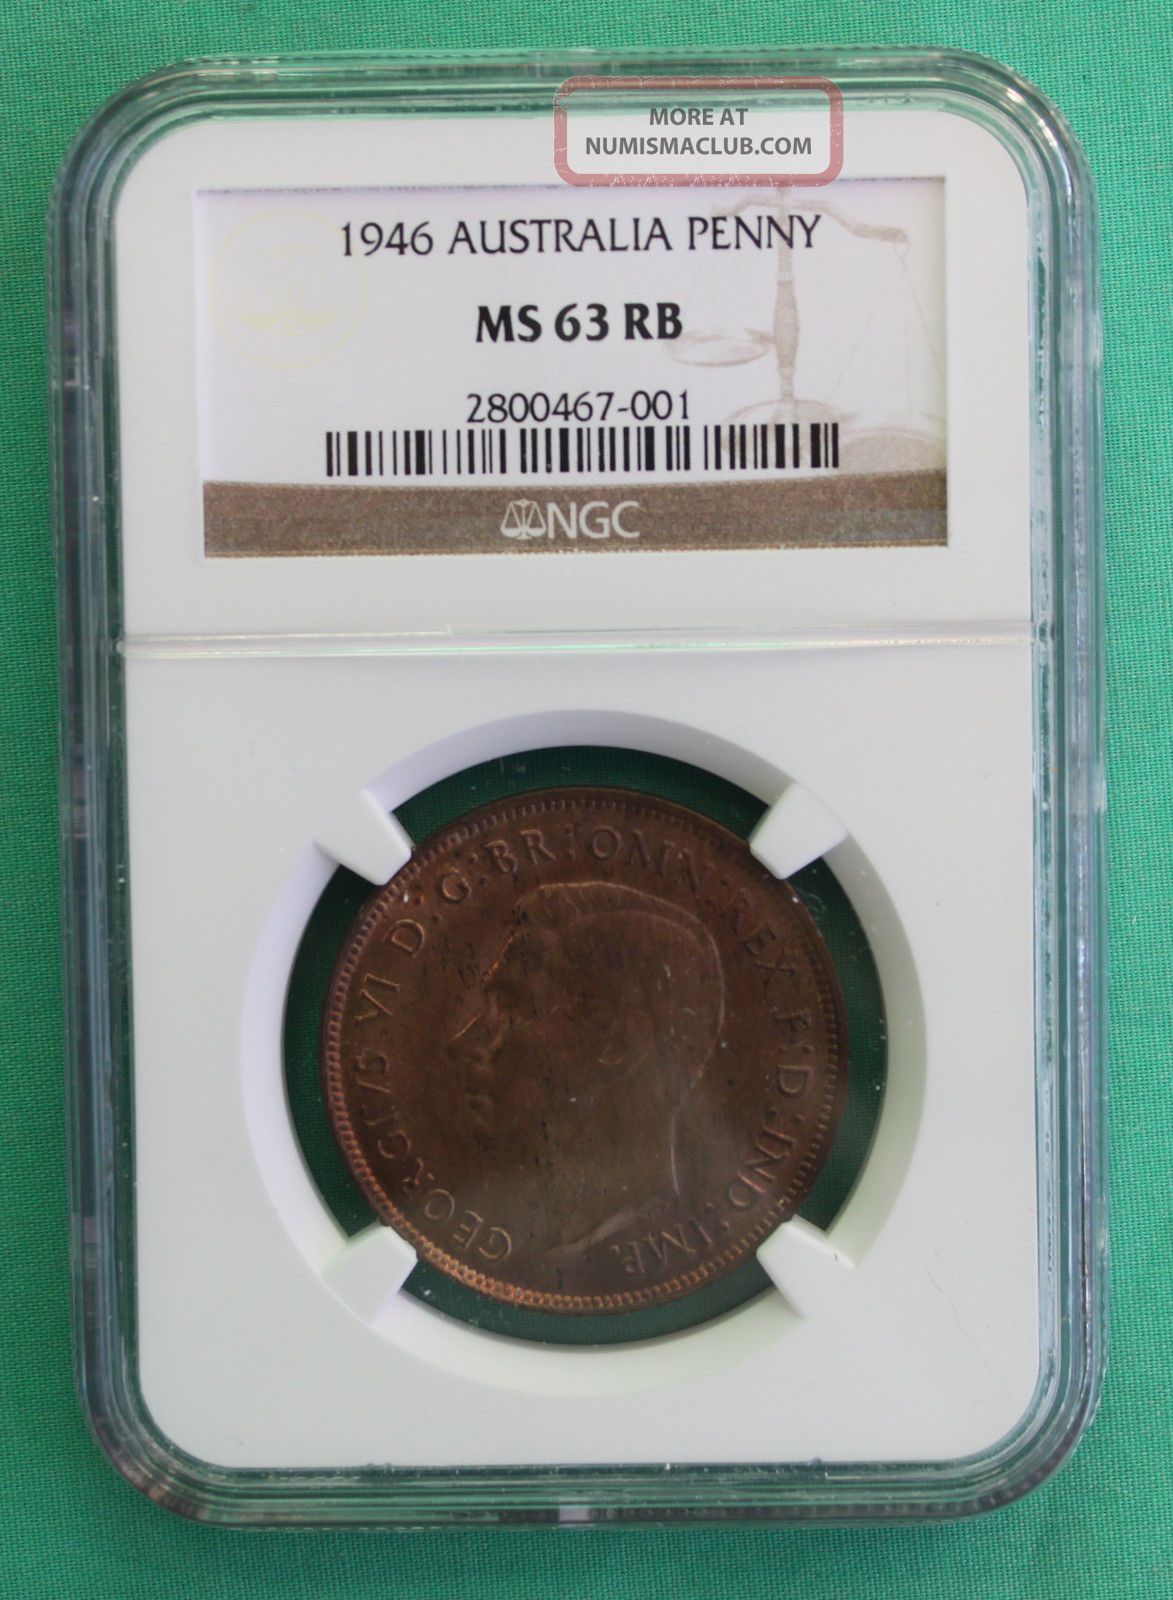 1946 Bronze Australian 1 Pence One Cent Penny Coin Ngc Graded Ms 63 Rb Australia photo